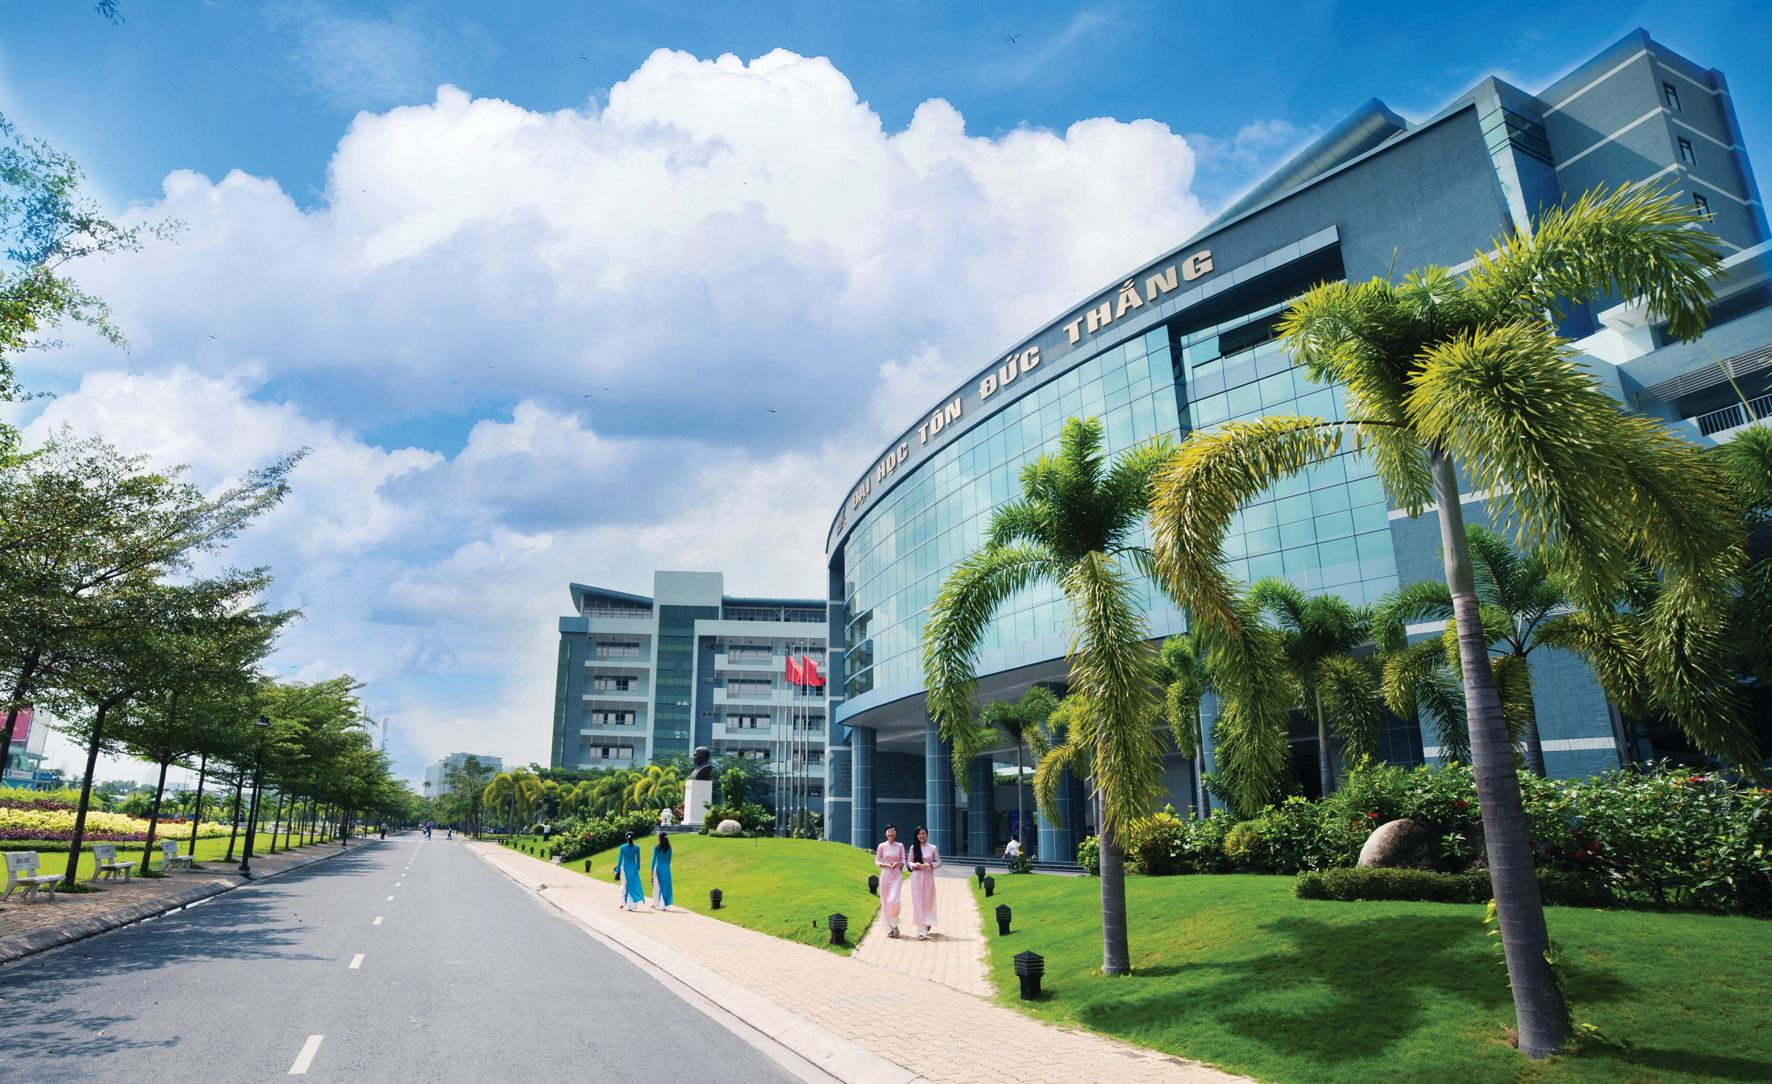 Ton Duc Thang University is ranked at 82nd place on THE